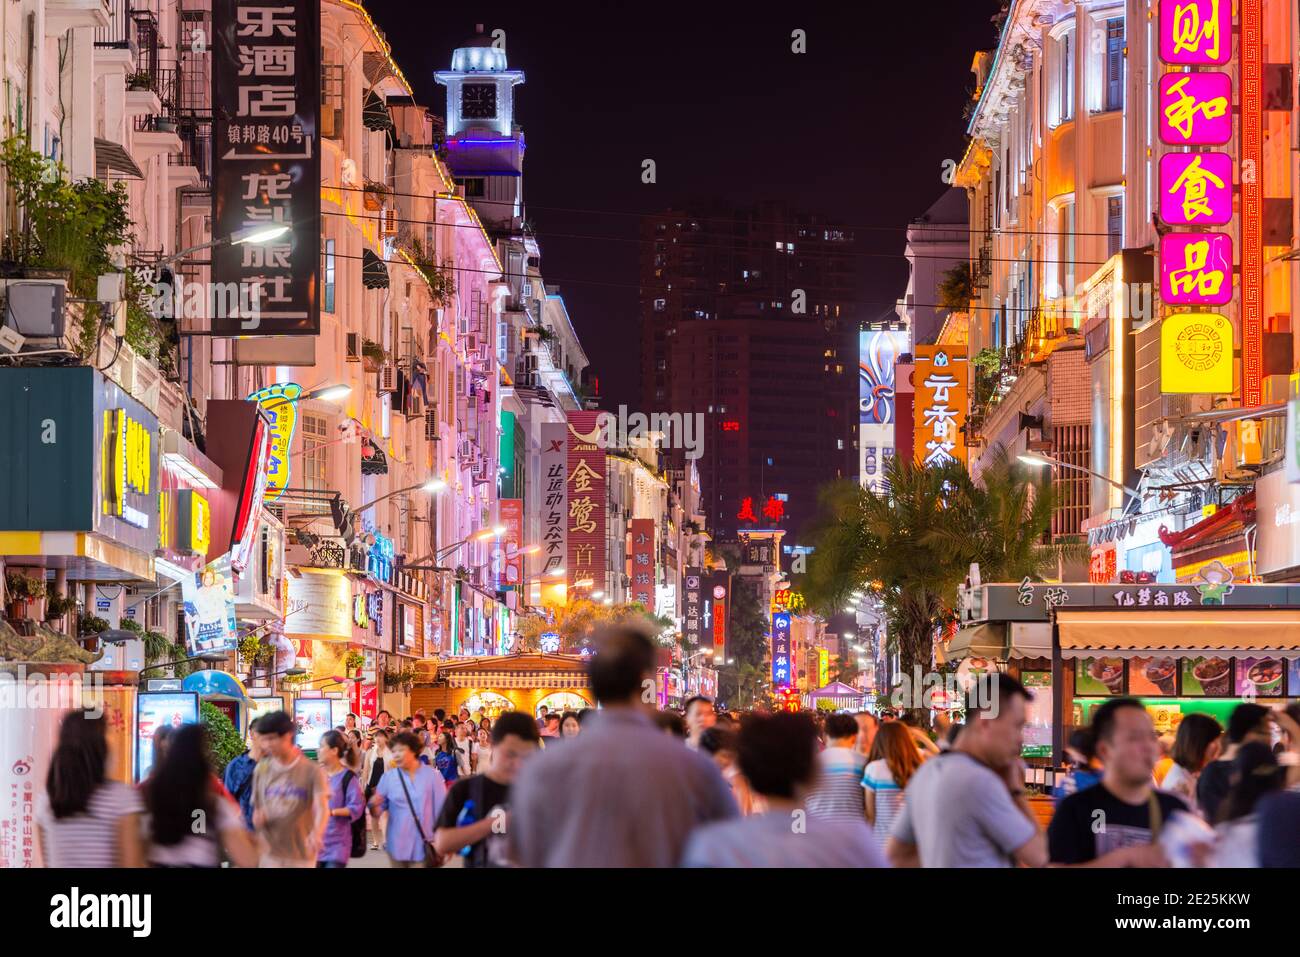 XIAMEN, CHINA - JUNE 11, 2014: Pedestrians walk on Zhongshan Road at night. The road is the main commercial street in Xiamen and parts have been fully Stock Photo